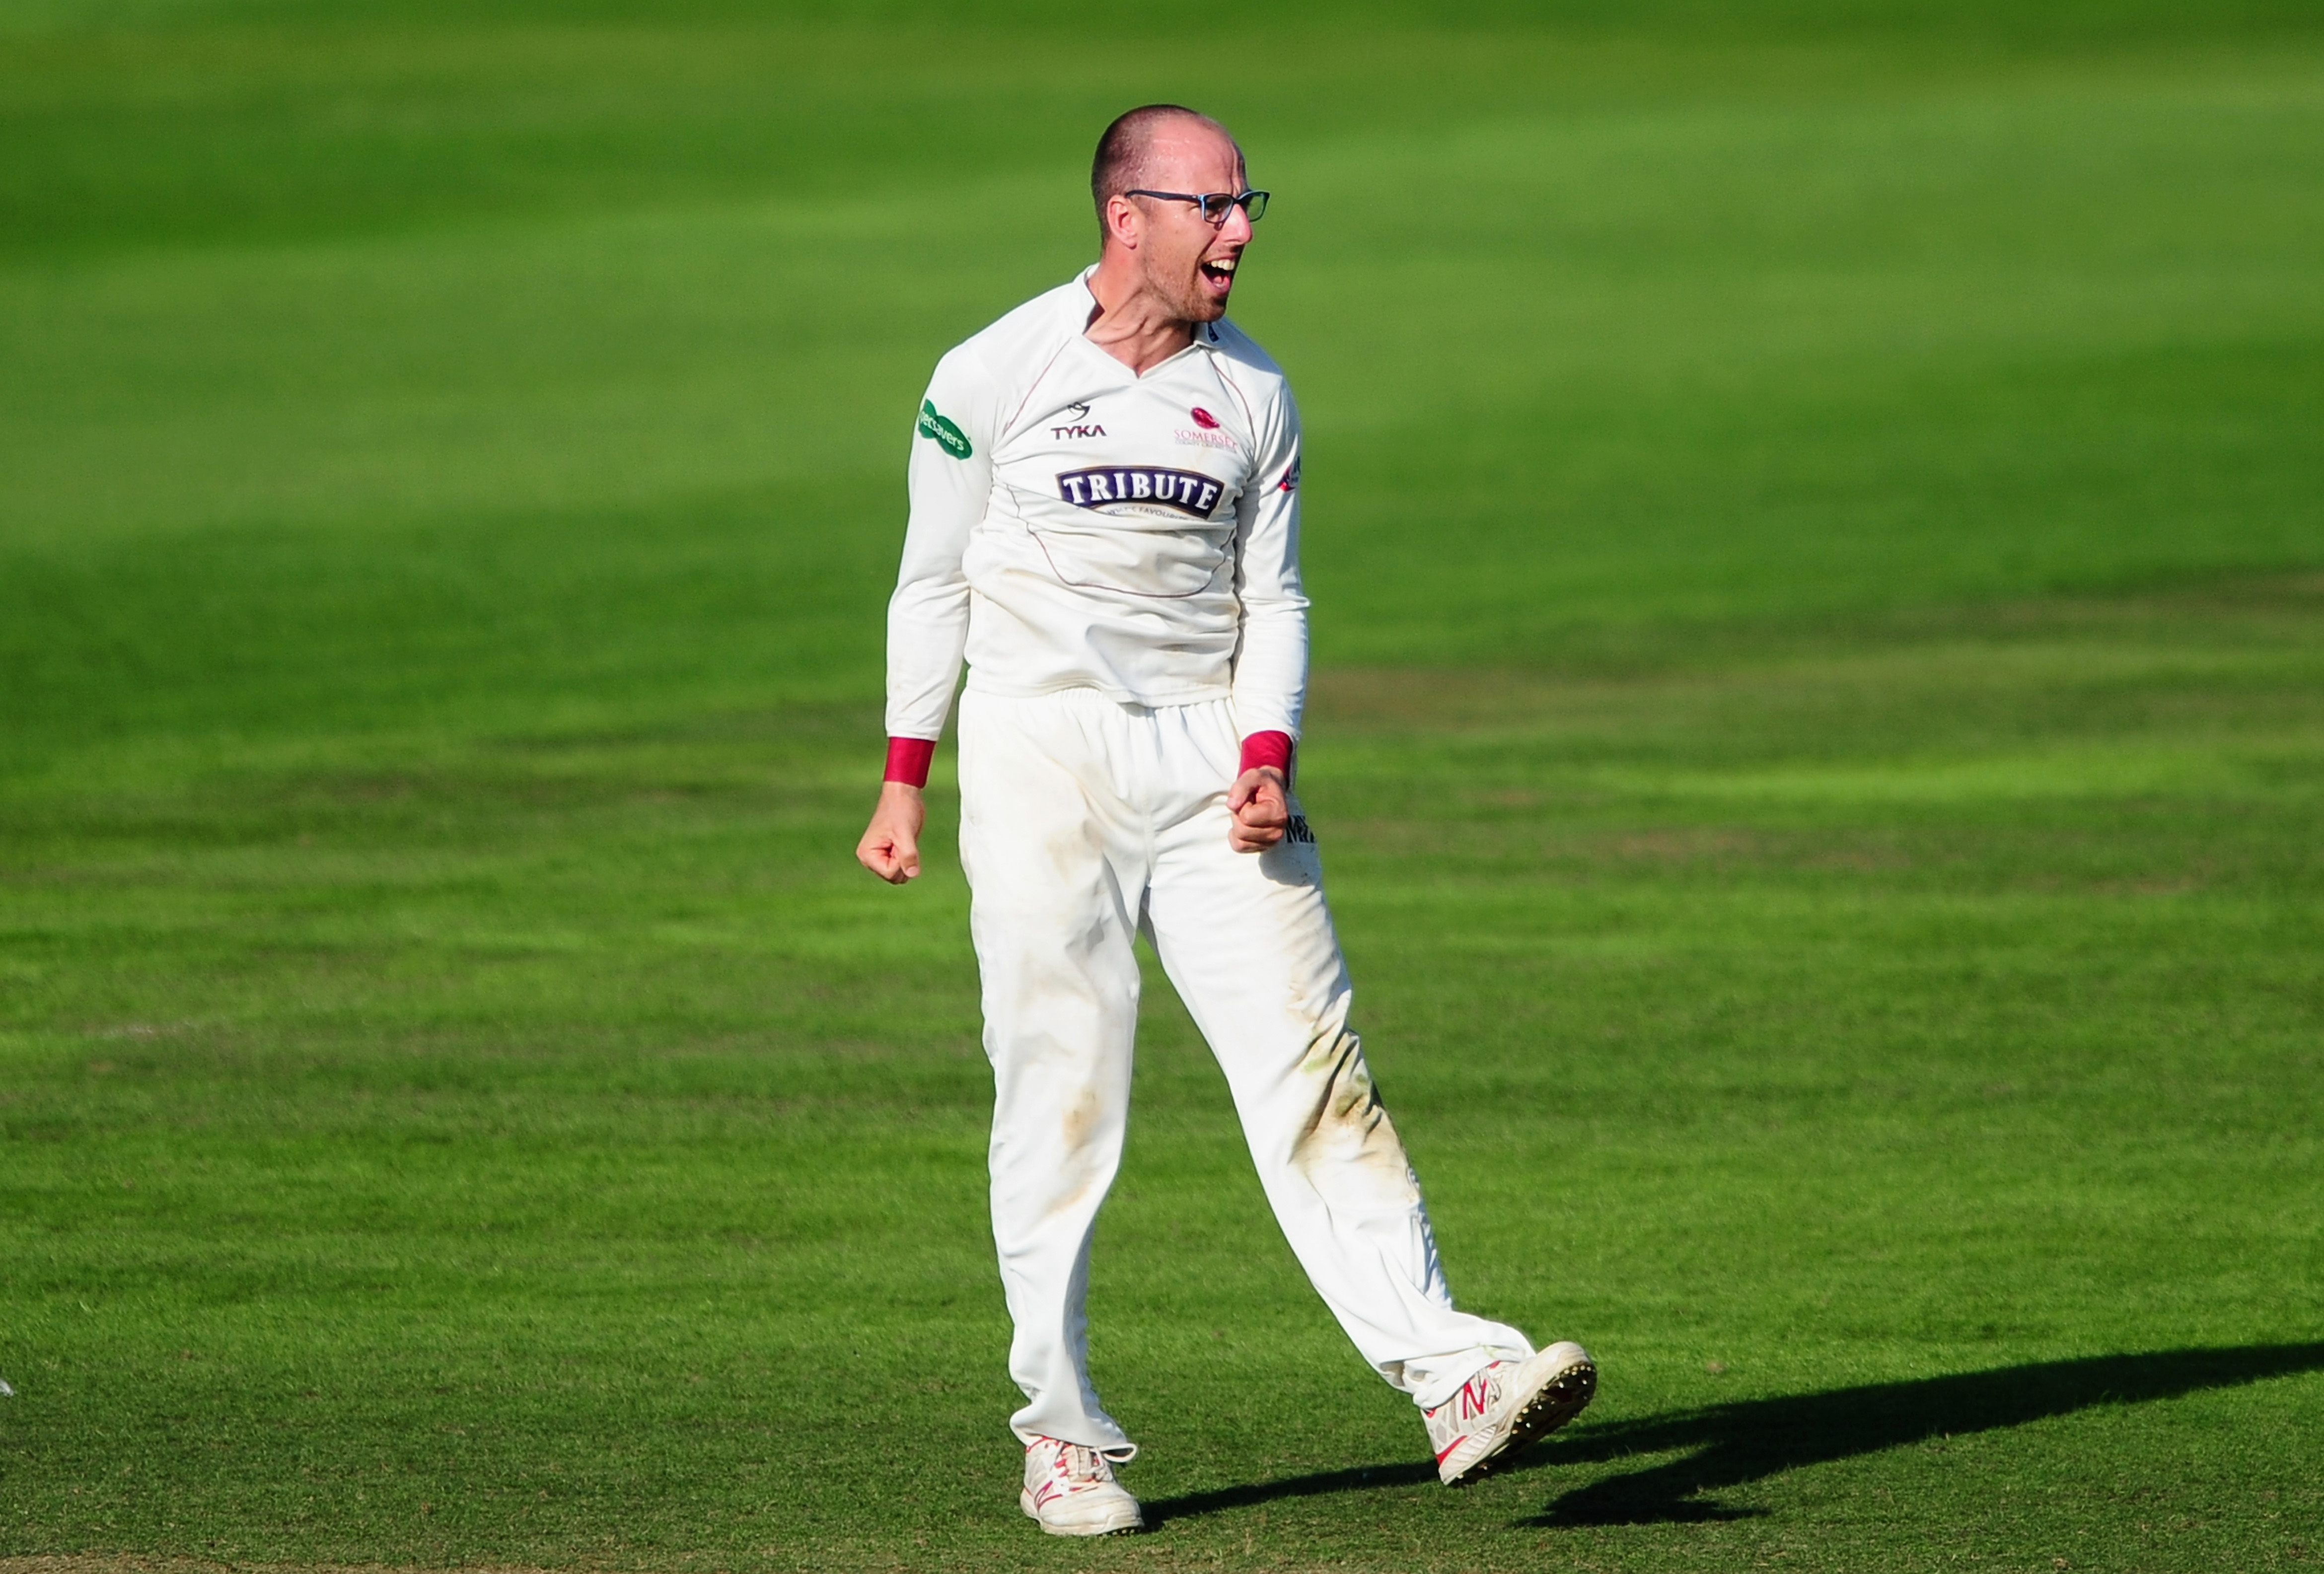 Leach voted PCA Player of the Month for September